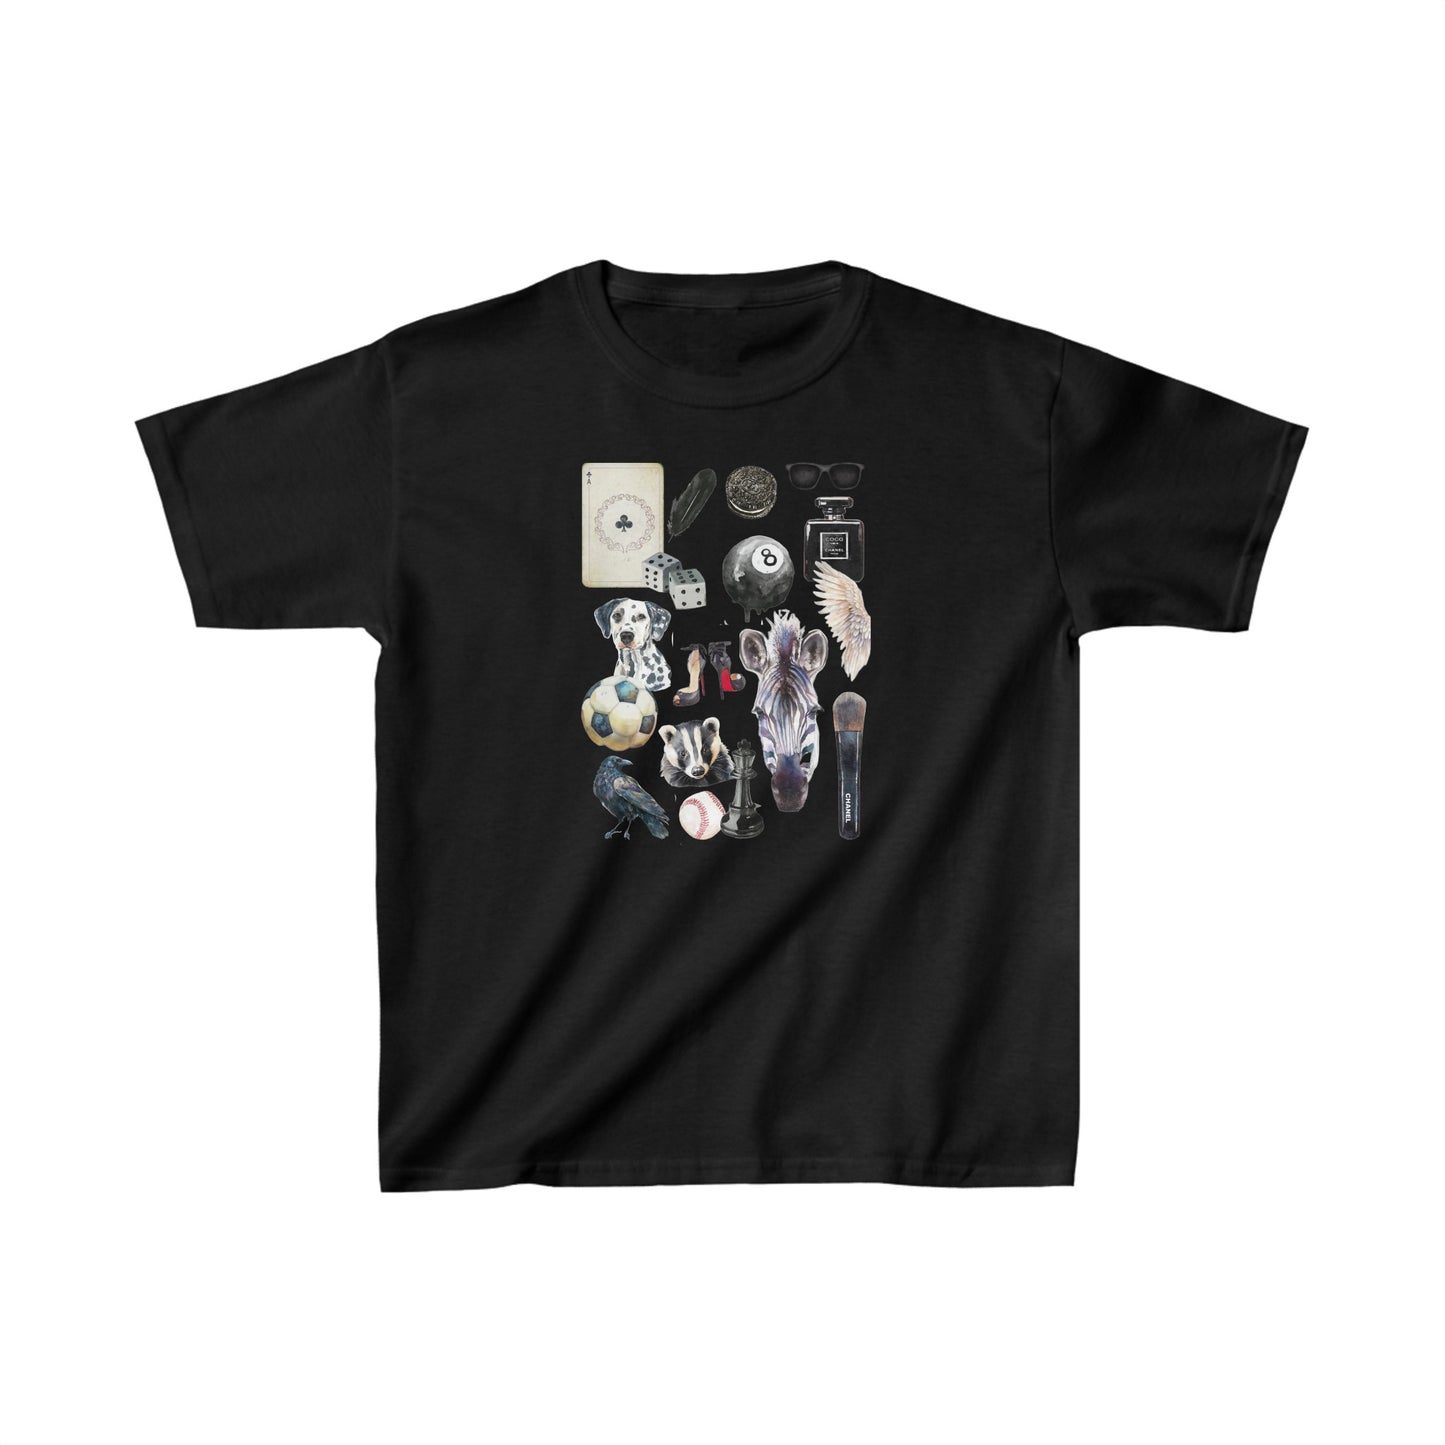 Women's Baby Tee Black and White Scrapbook Collage Design.